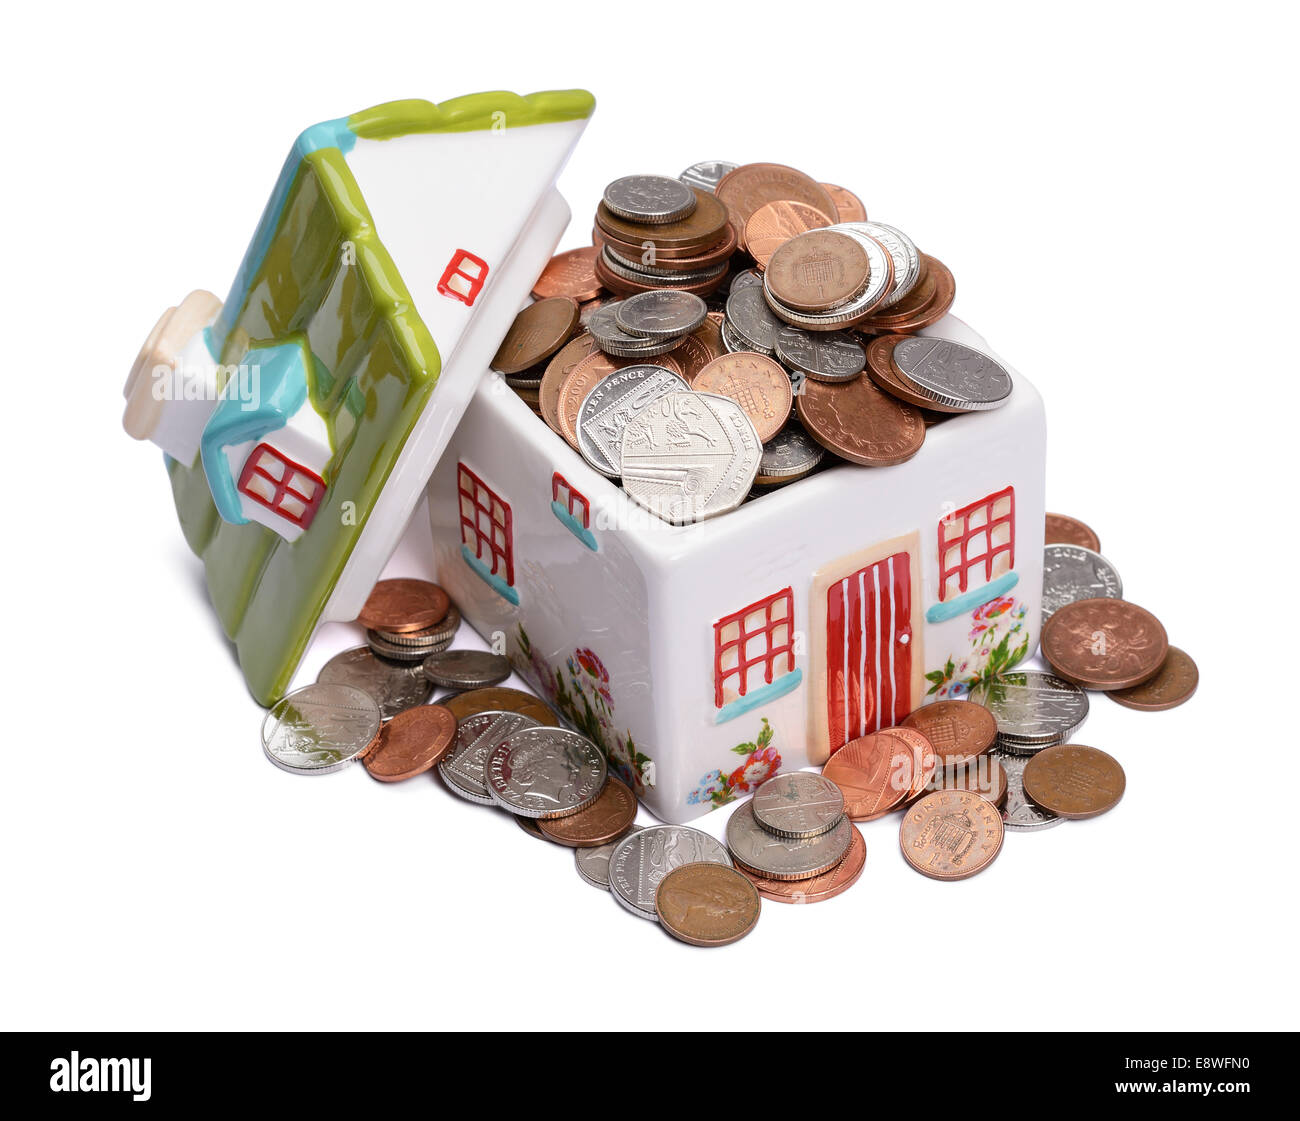 Ceramic house model filled with money Stock Photo